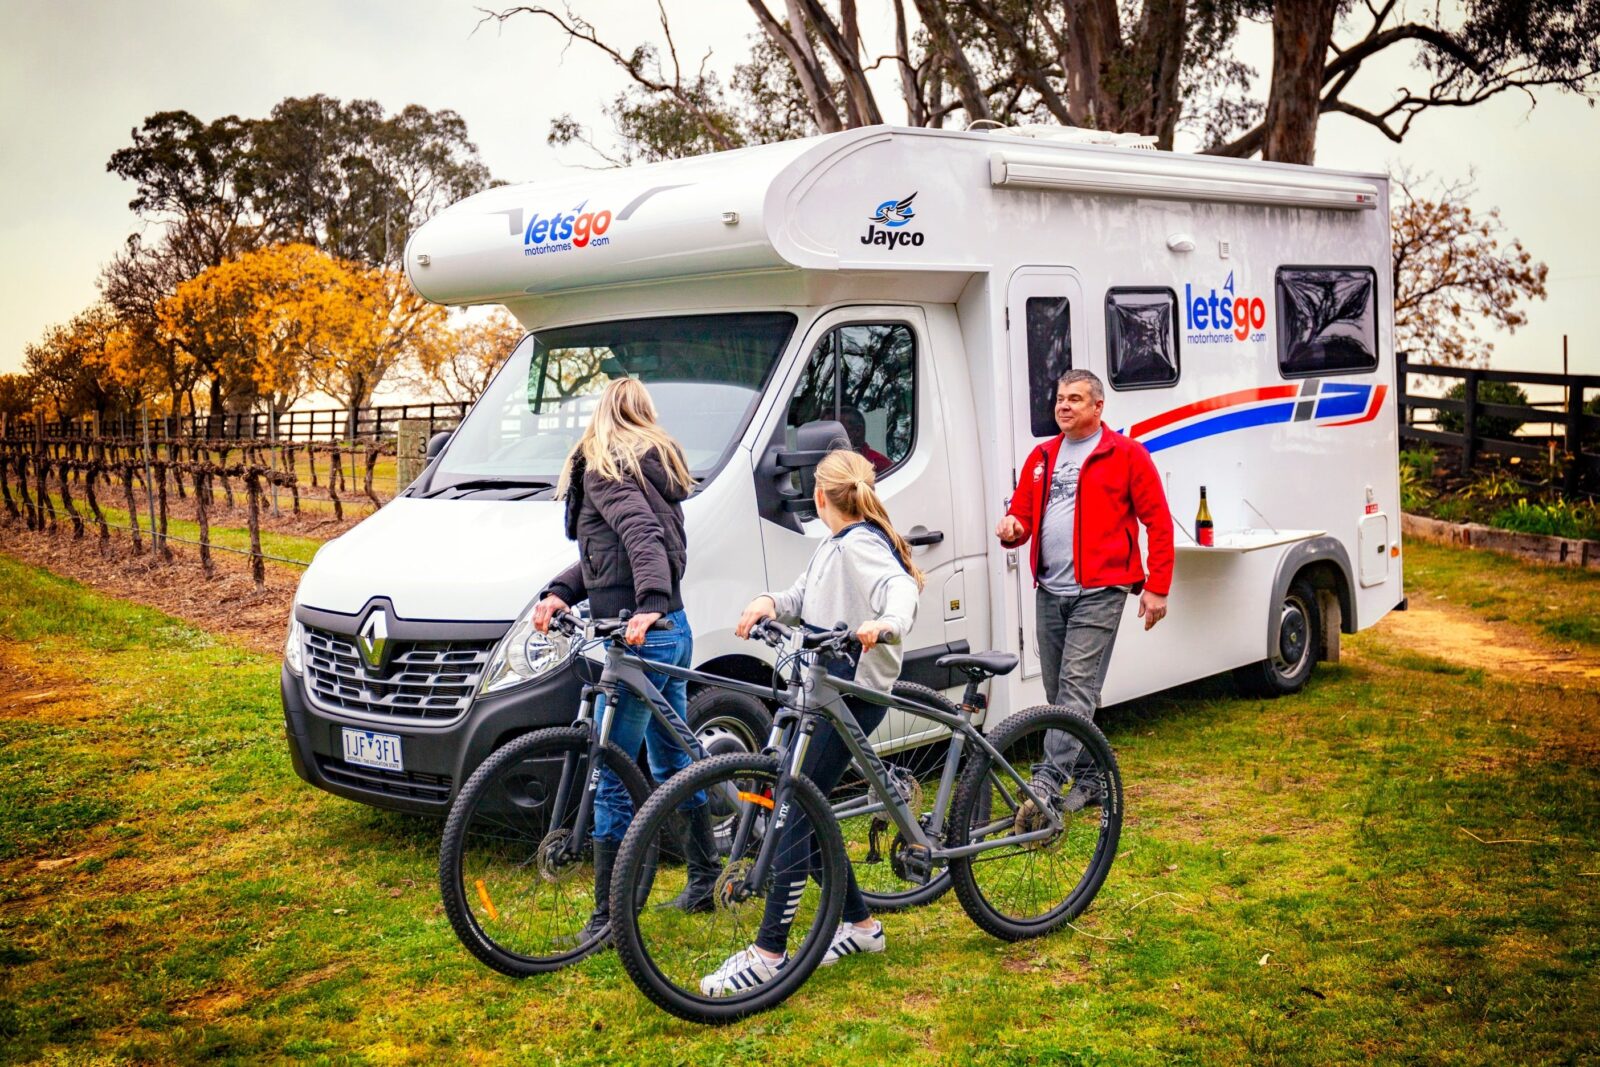 Let's Go Motorhome & Bike hire - Ideal for the family